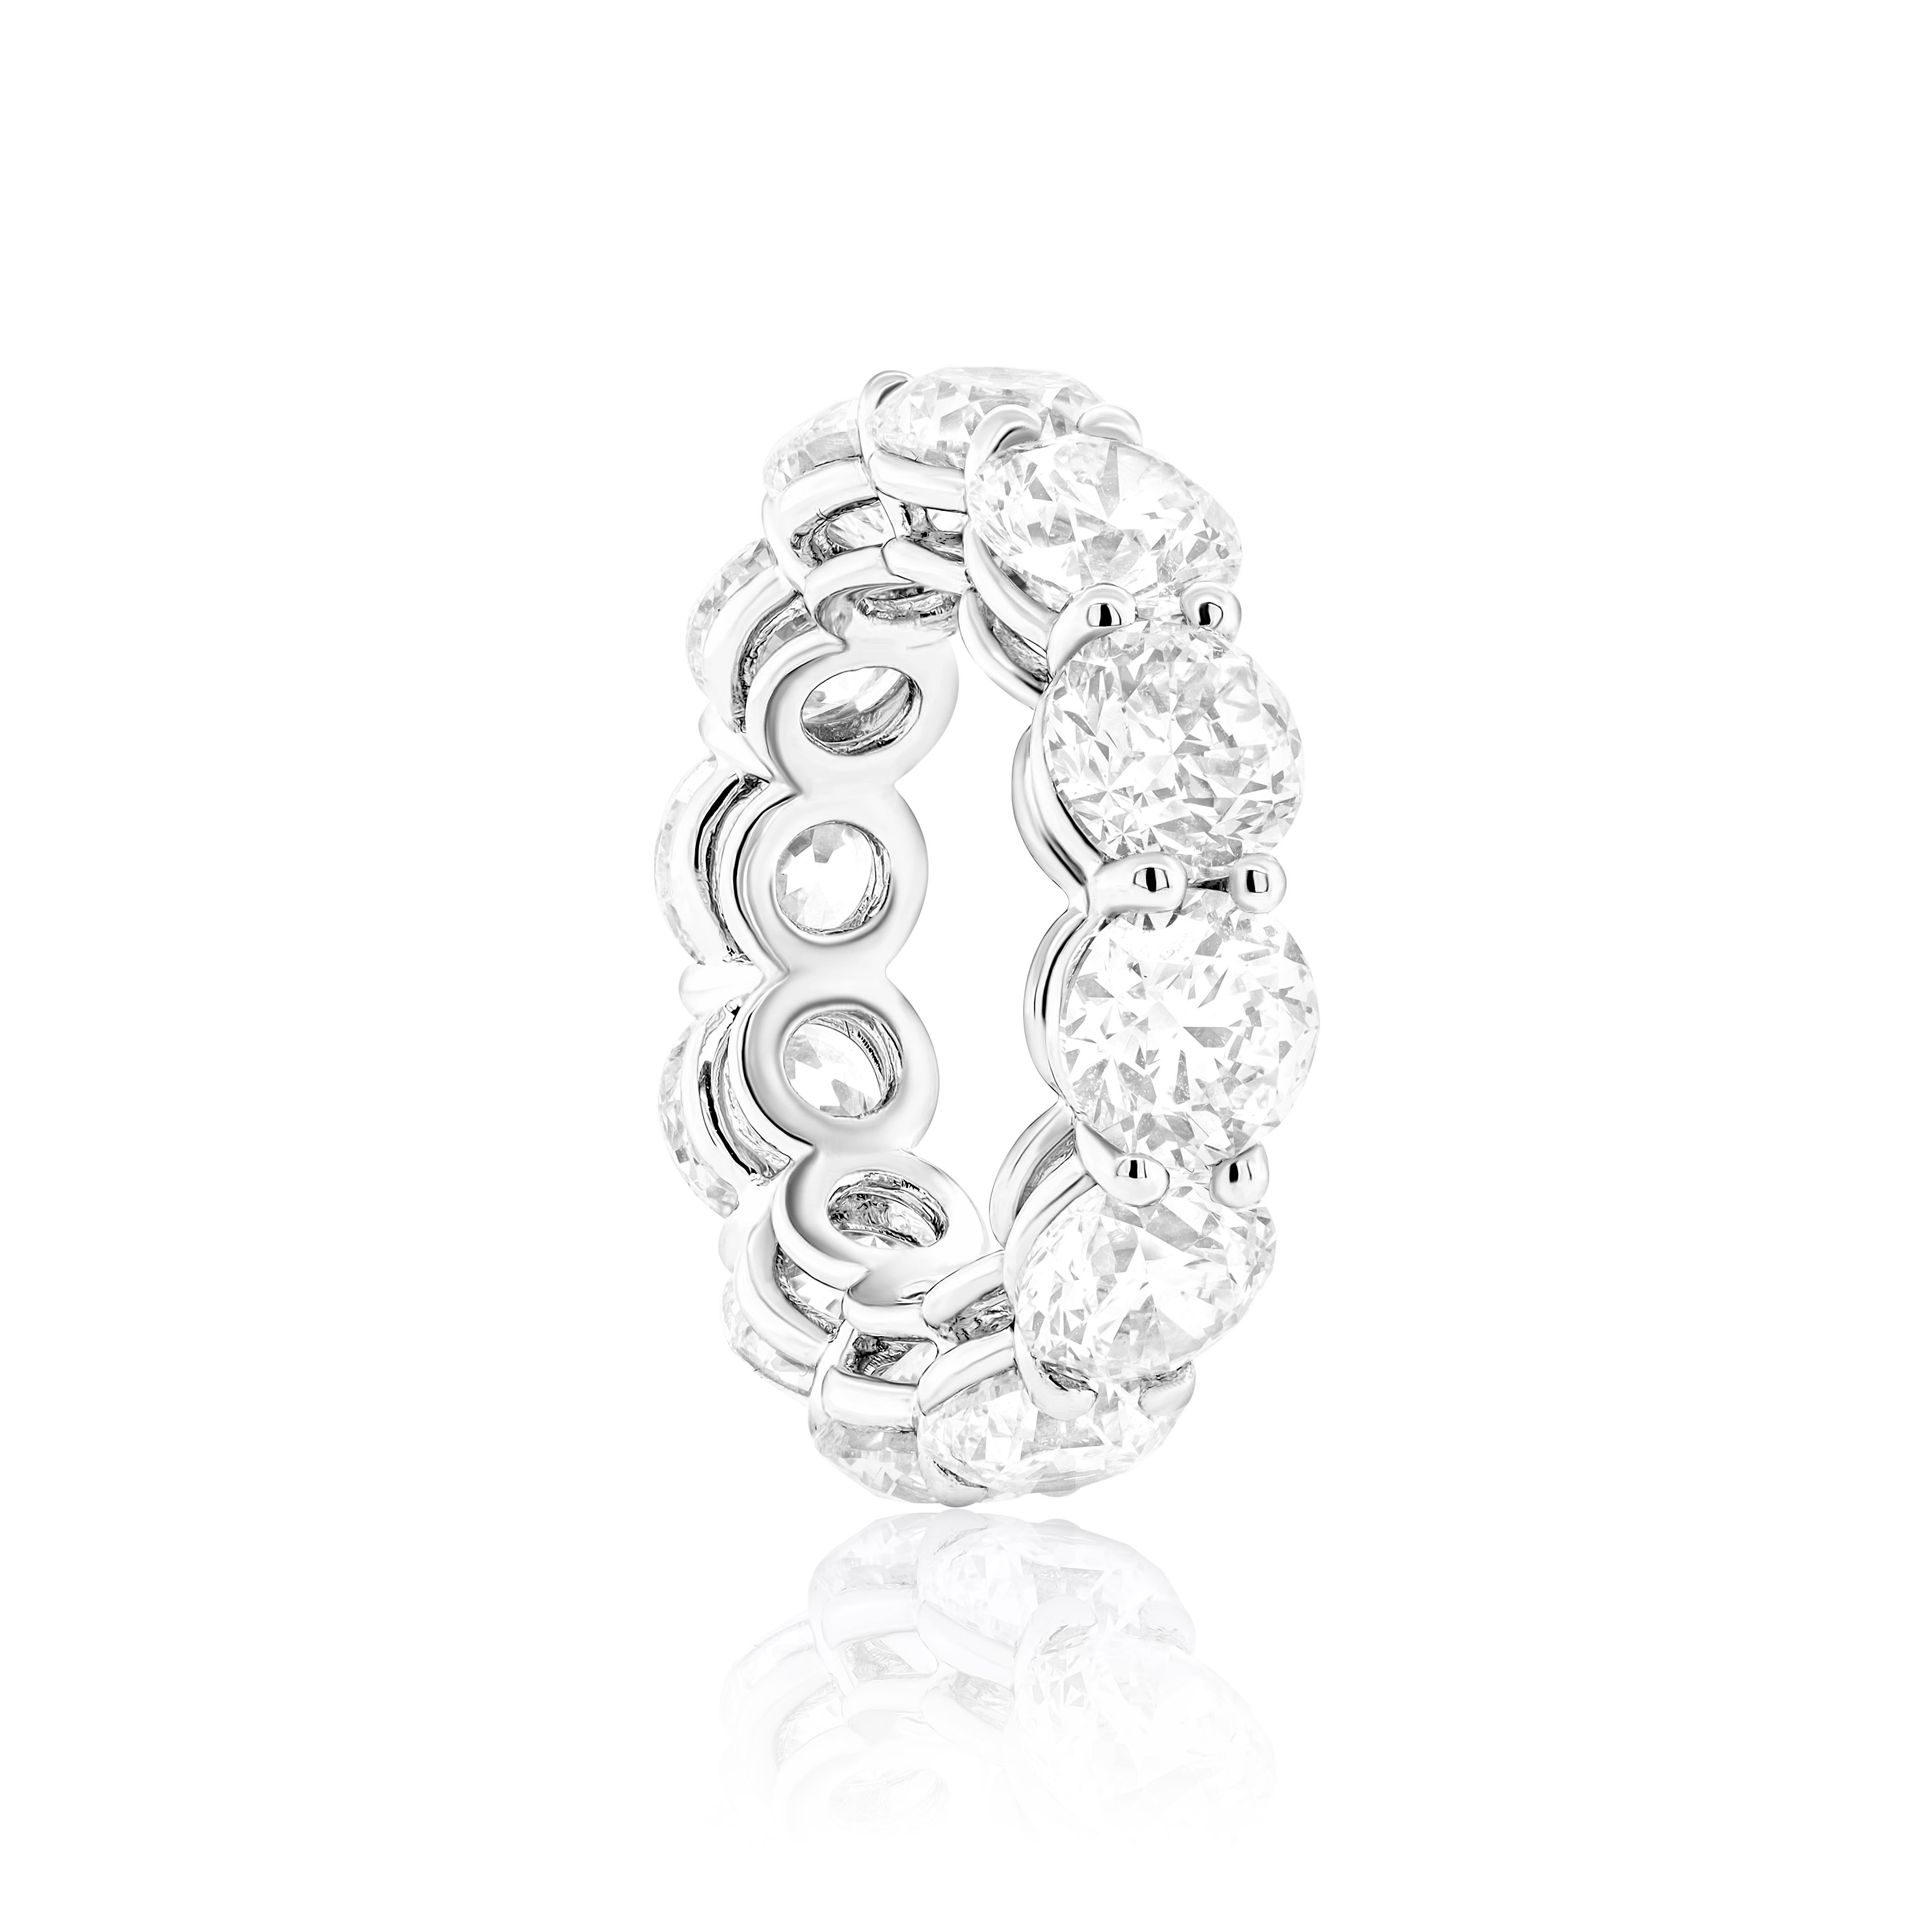 PLATINUM ETERNITY BAND WITH 12.00CTS OR ROUND DIAMONDS
Diana M. is a leading supplier of top-quality fine jewelry for over 35 years.
Diana M is one-stop shop for all your jewelry shopping, carrying line of diamond rings, earrings, bracelets,